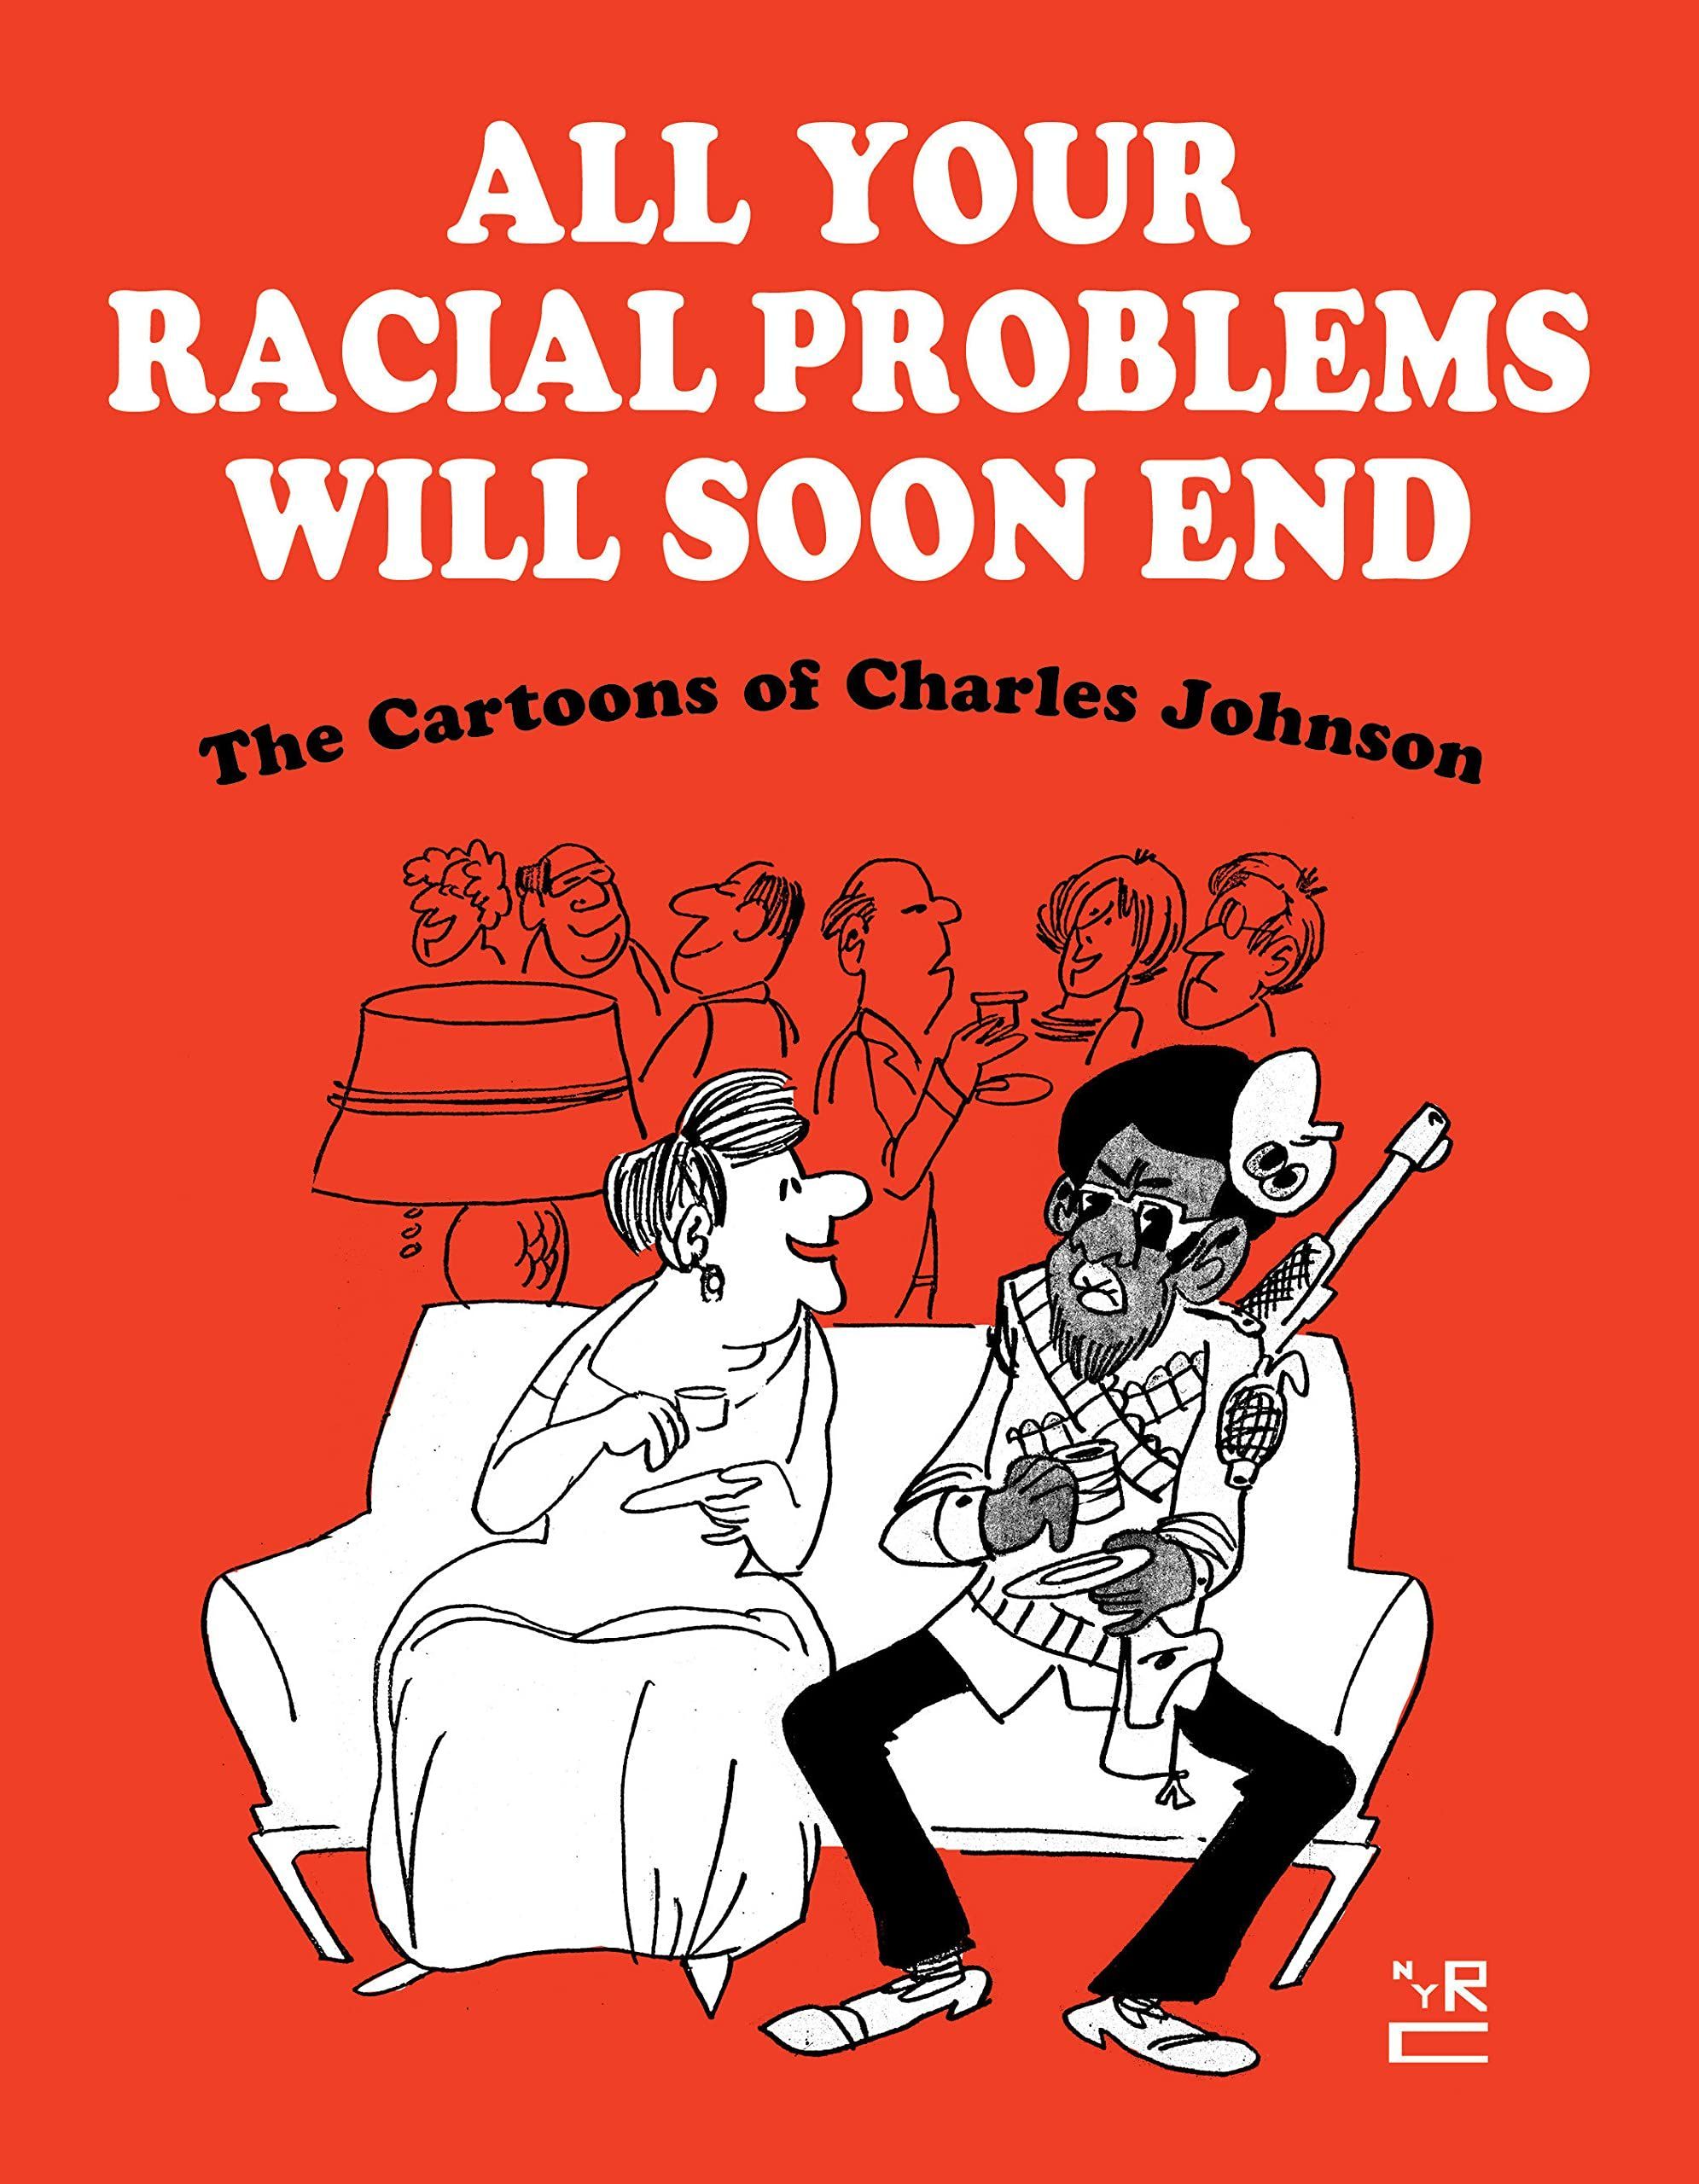 Plight and Parody: On Charles Johnson’s “All Your Racial Problems Will Soon End”